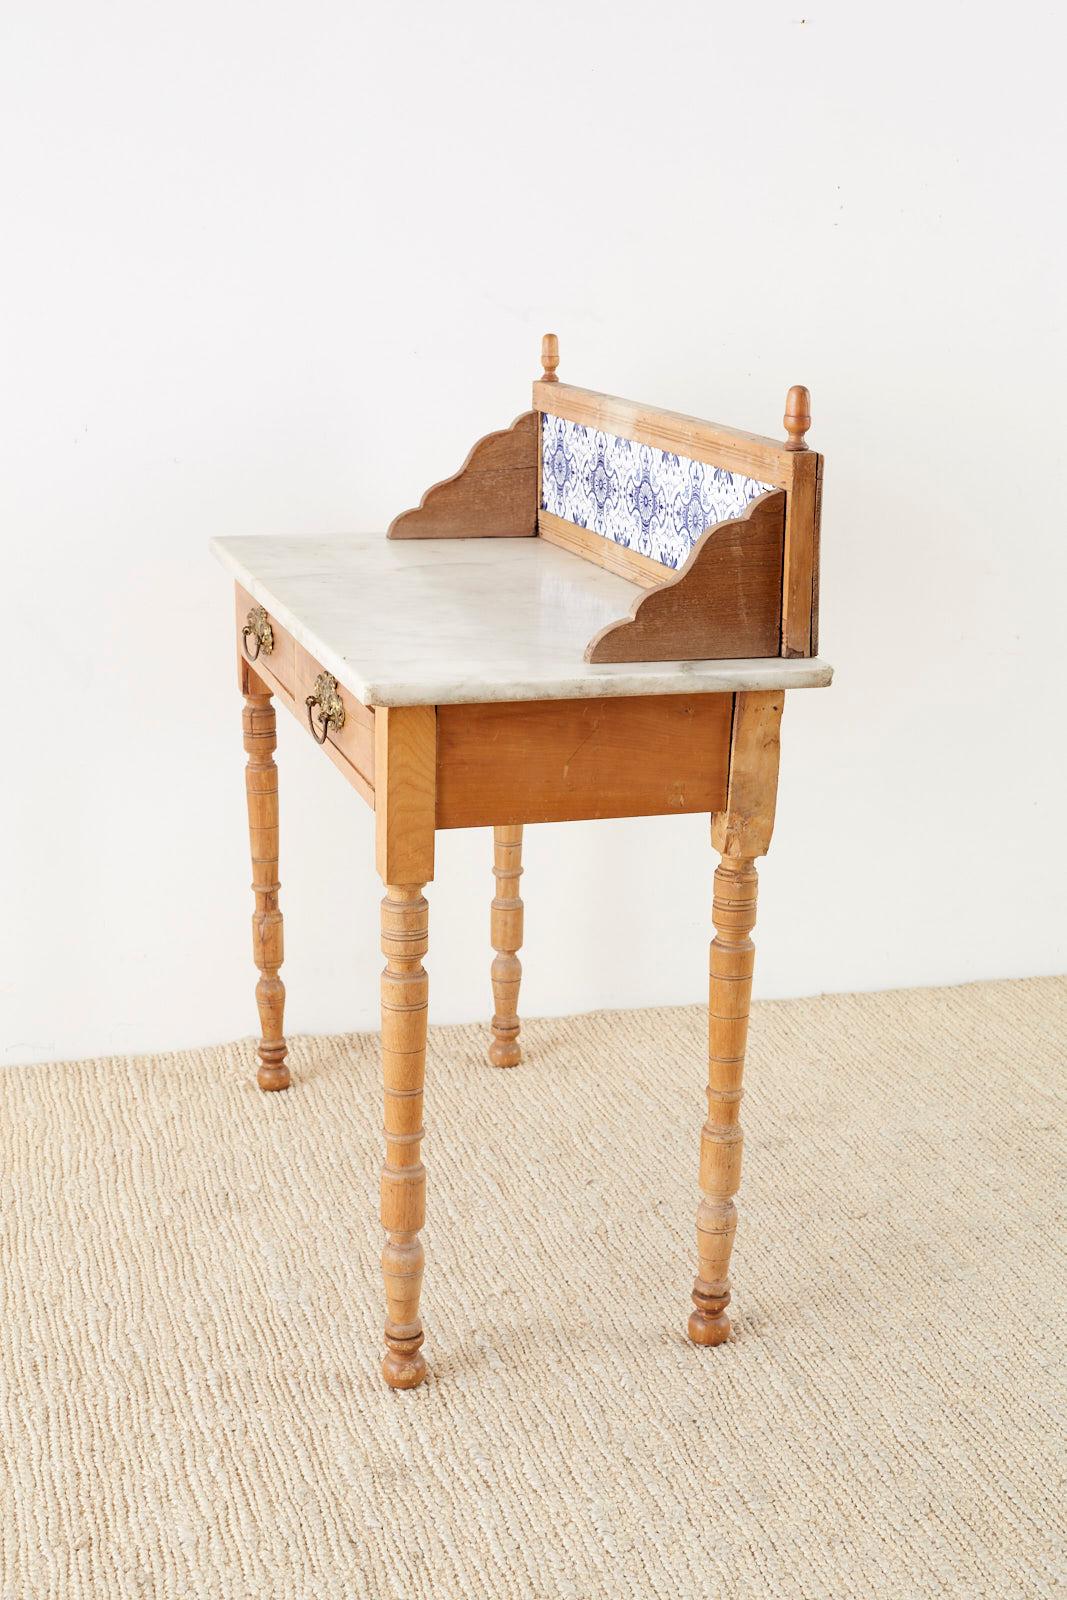 Country Pine Marble-Top Table with Blue and White Tiles 8